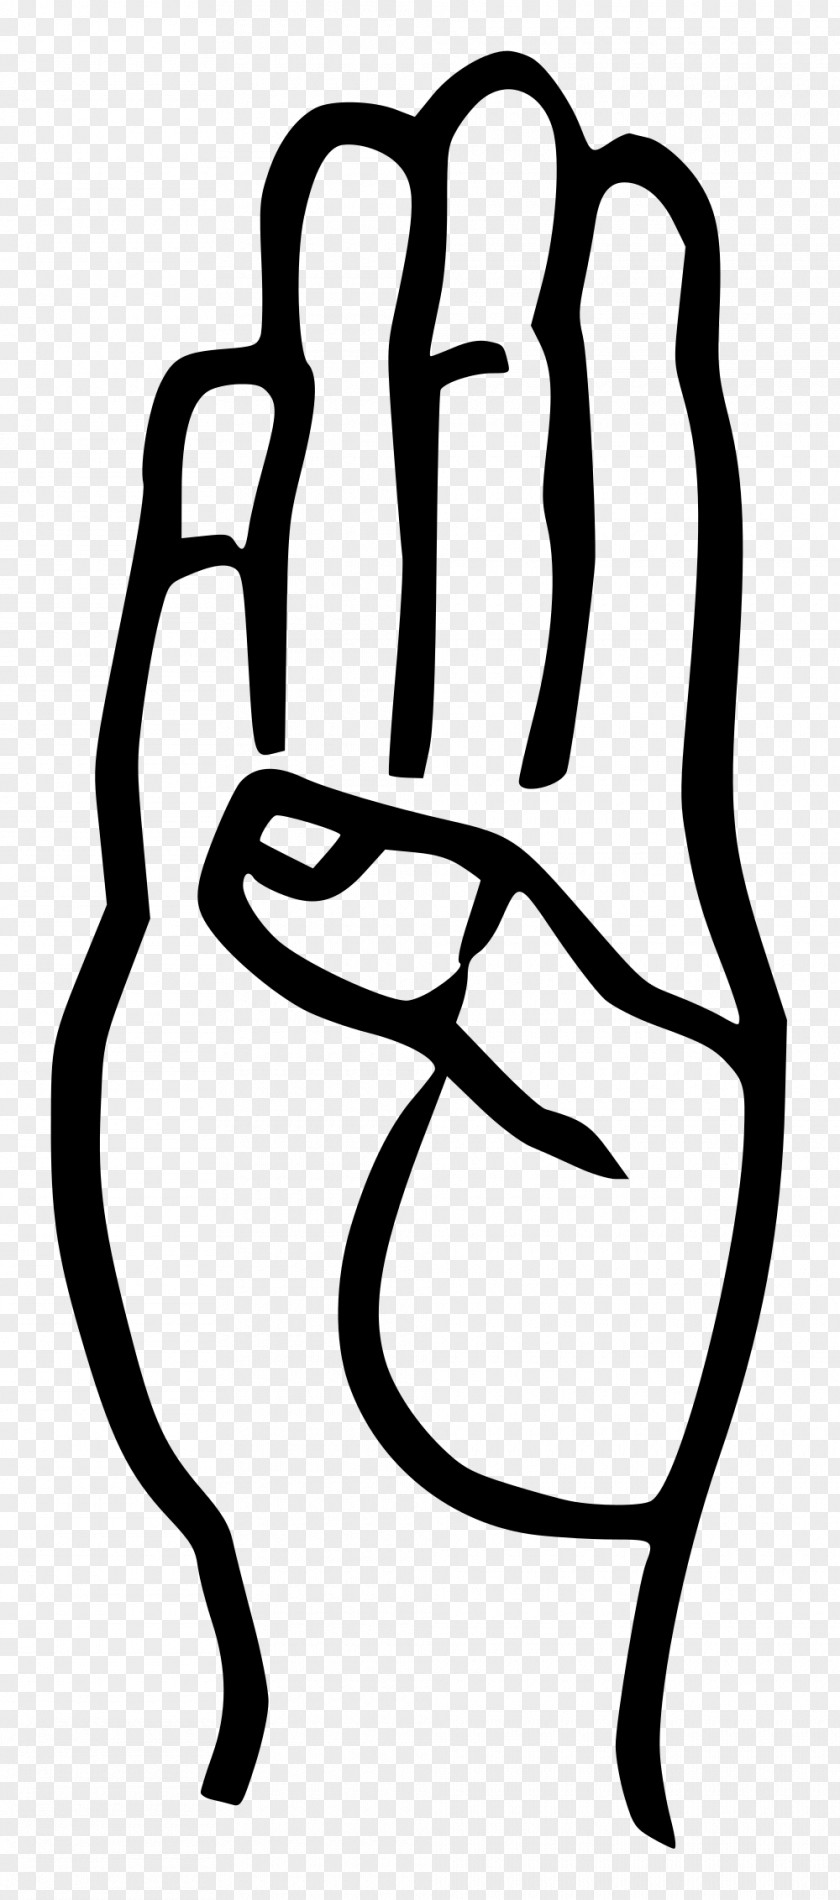 Share American Sign Language Letter B PNG